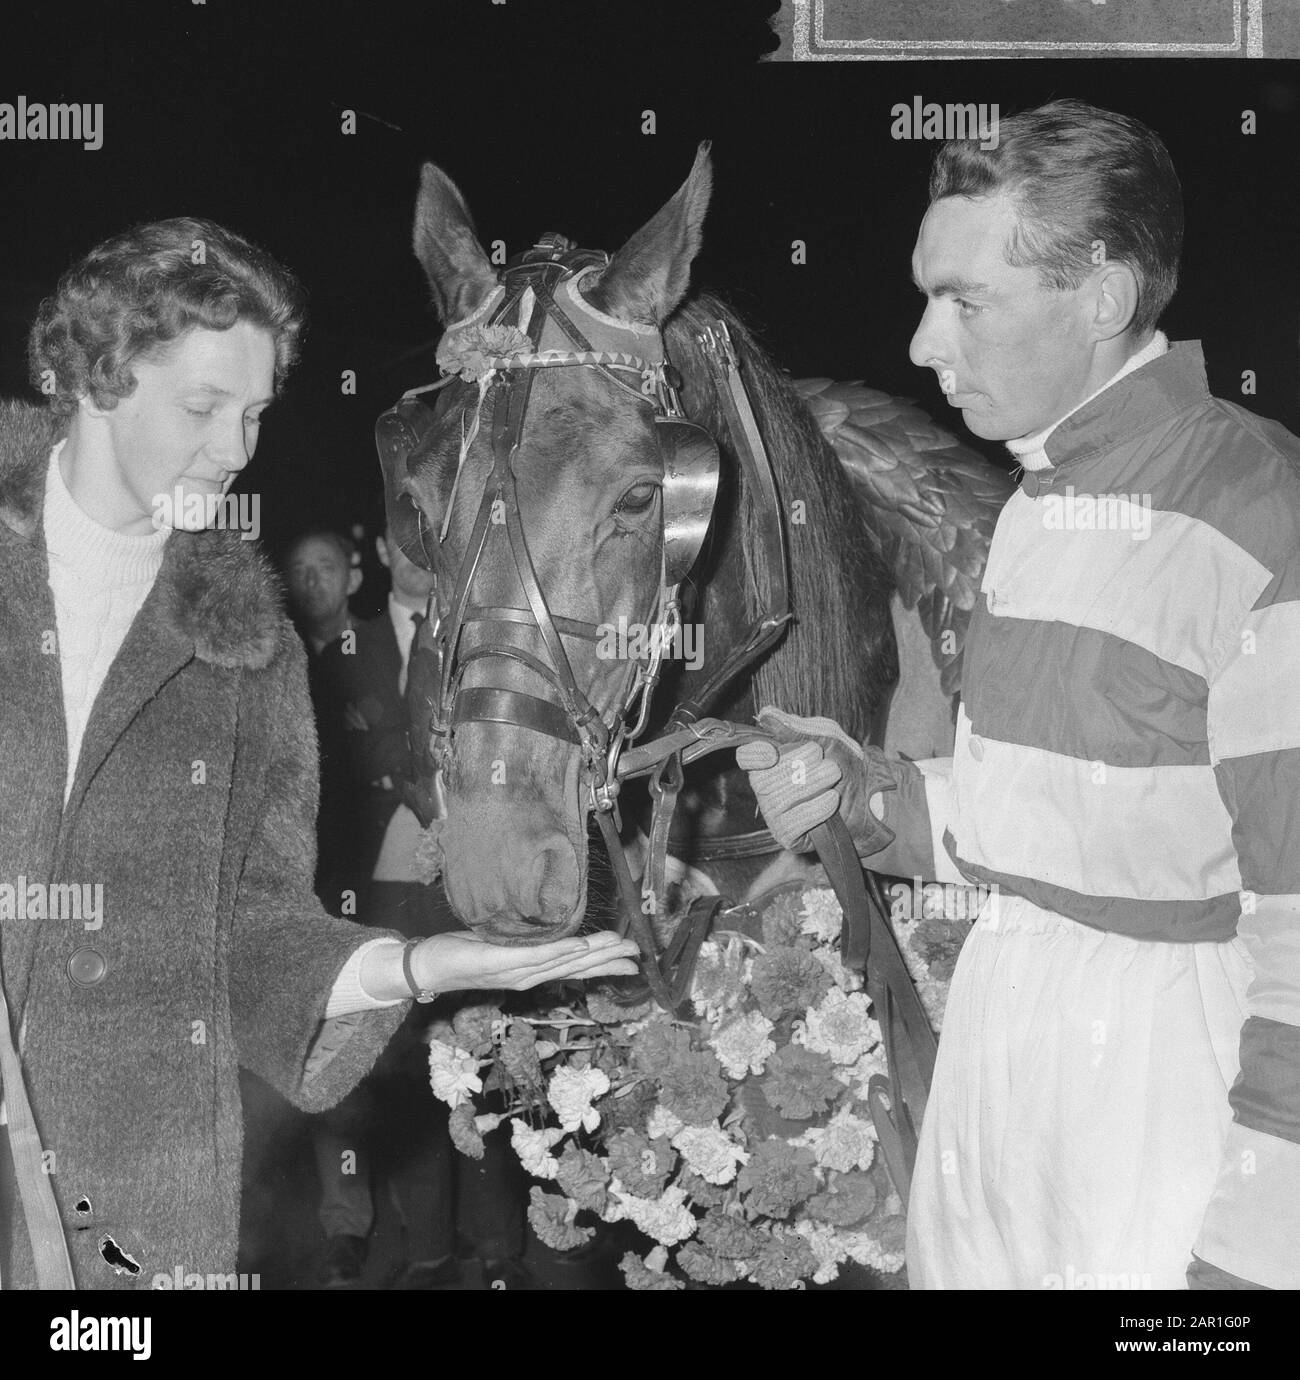 Horse Quicksilver S. while it is honoured at the Hilversum racecourse  Jan Wagenaar jr. and wife at the horse Date: 19 October 1965 Location: Hilversum, Noord-Holland Keywords: tributions, horses, equestrian person name: Wagenaar jr., Jan Stock Photo